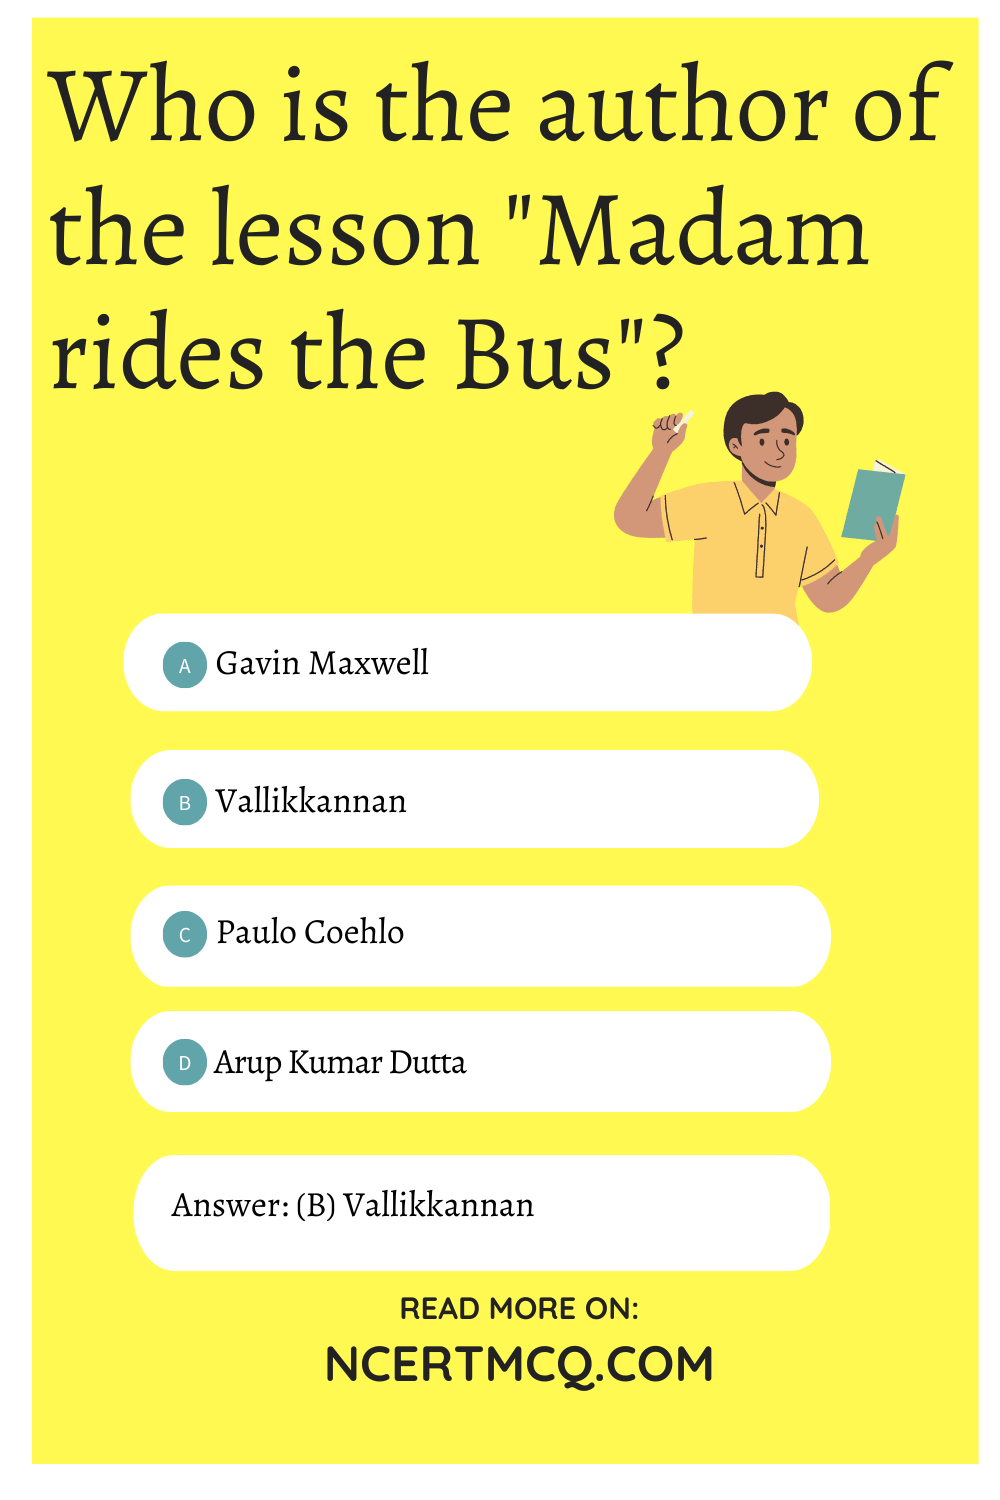 Who is the author of the lesson "Madam rides the Bus"?